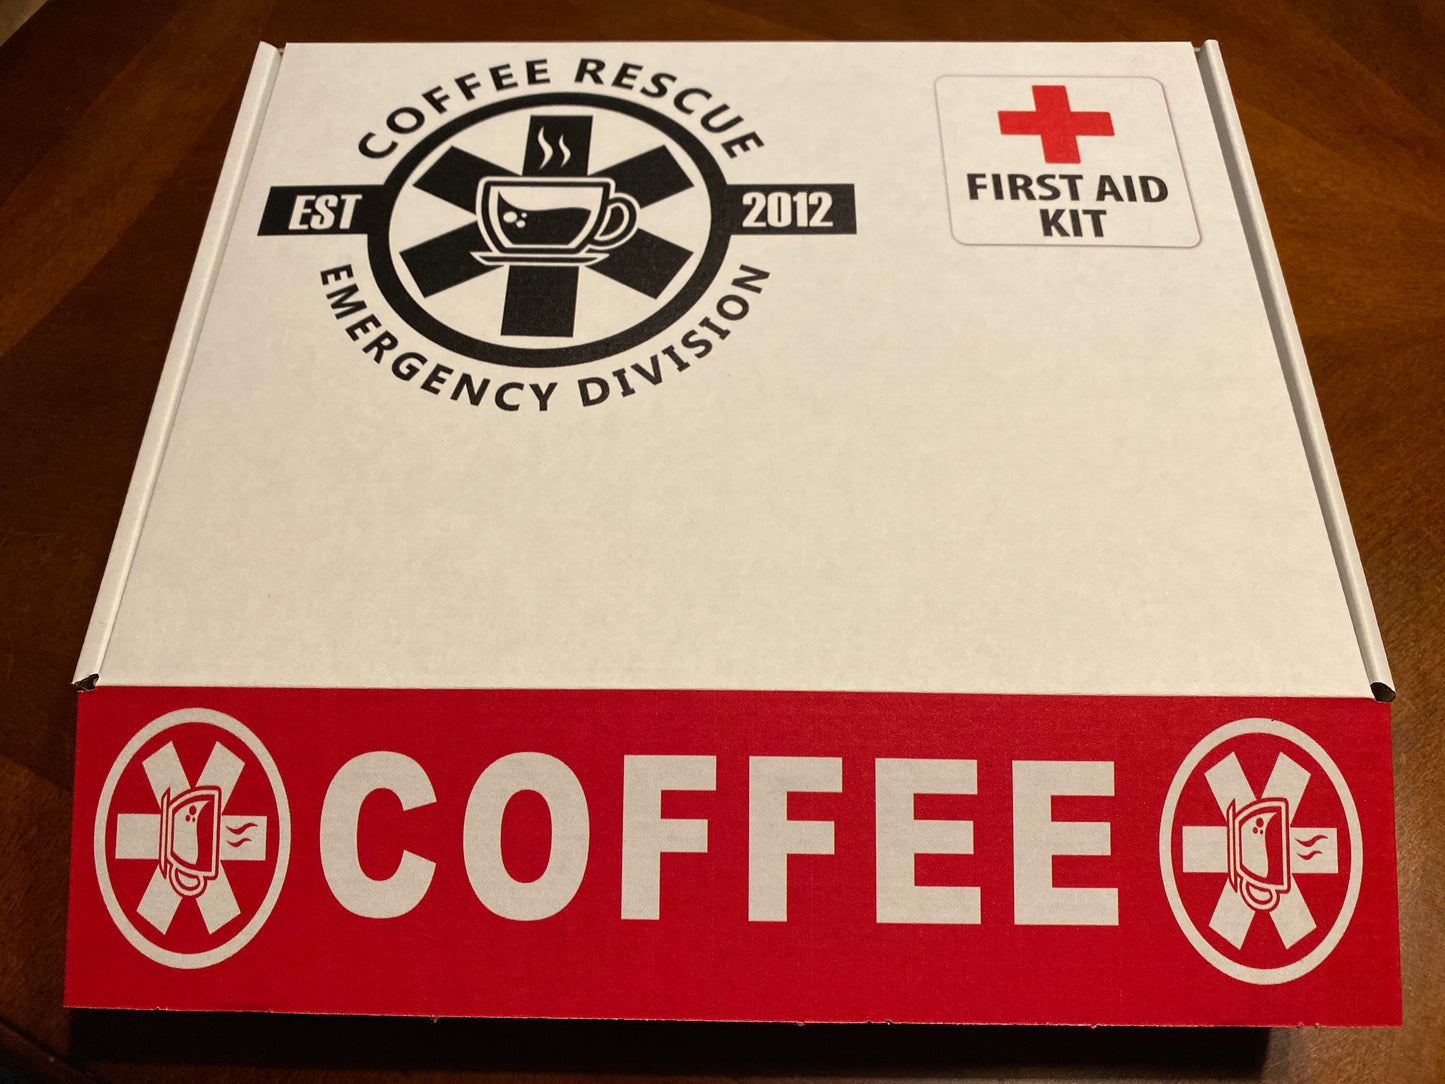 24 Pack K-Cup Variety Pack “First Aid Kit”